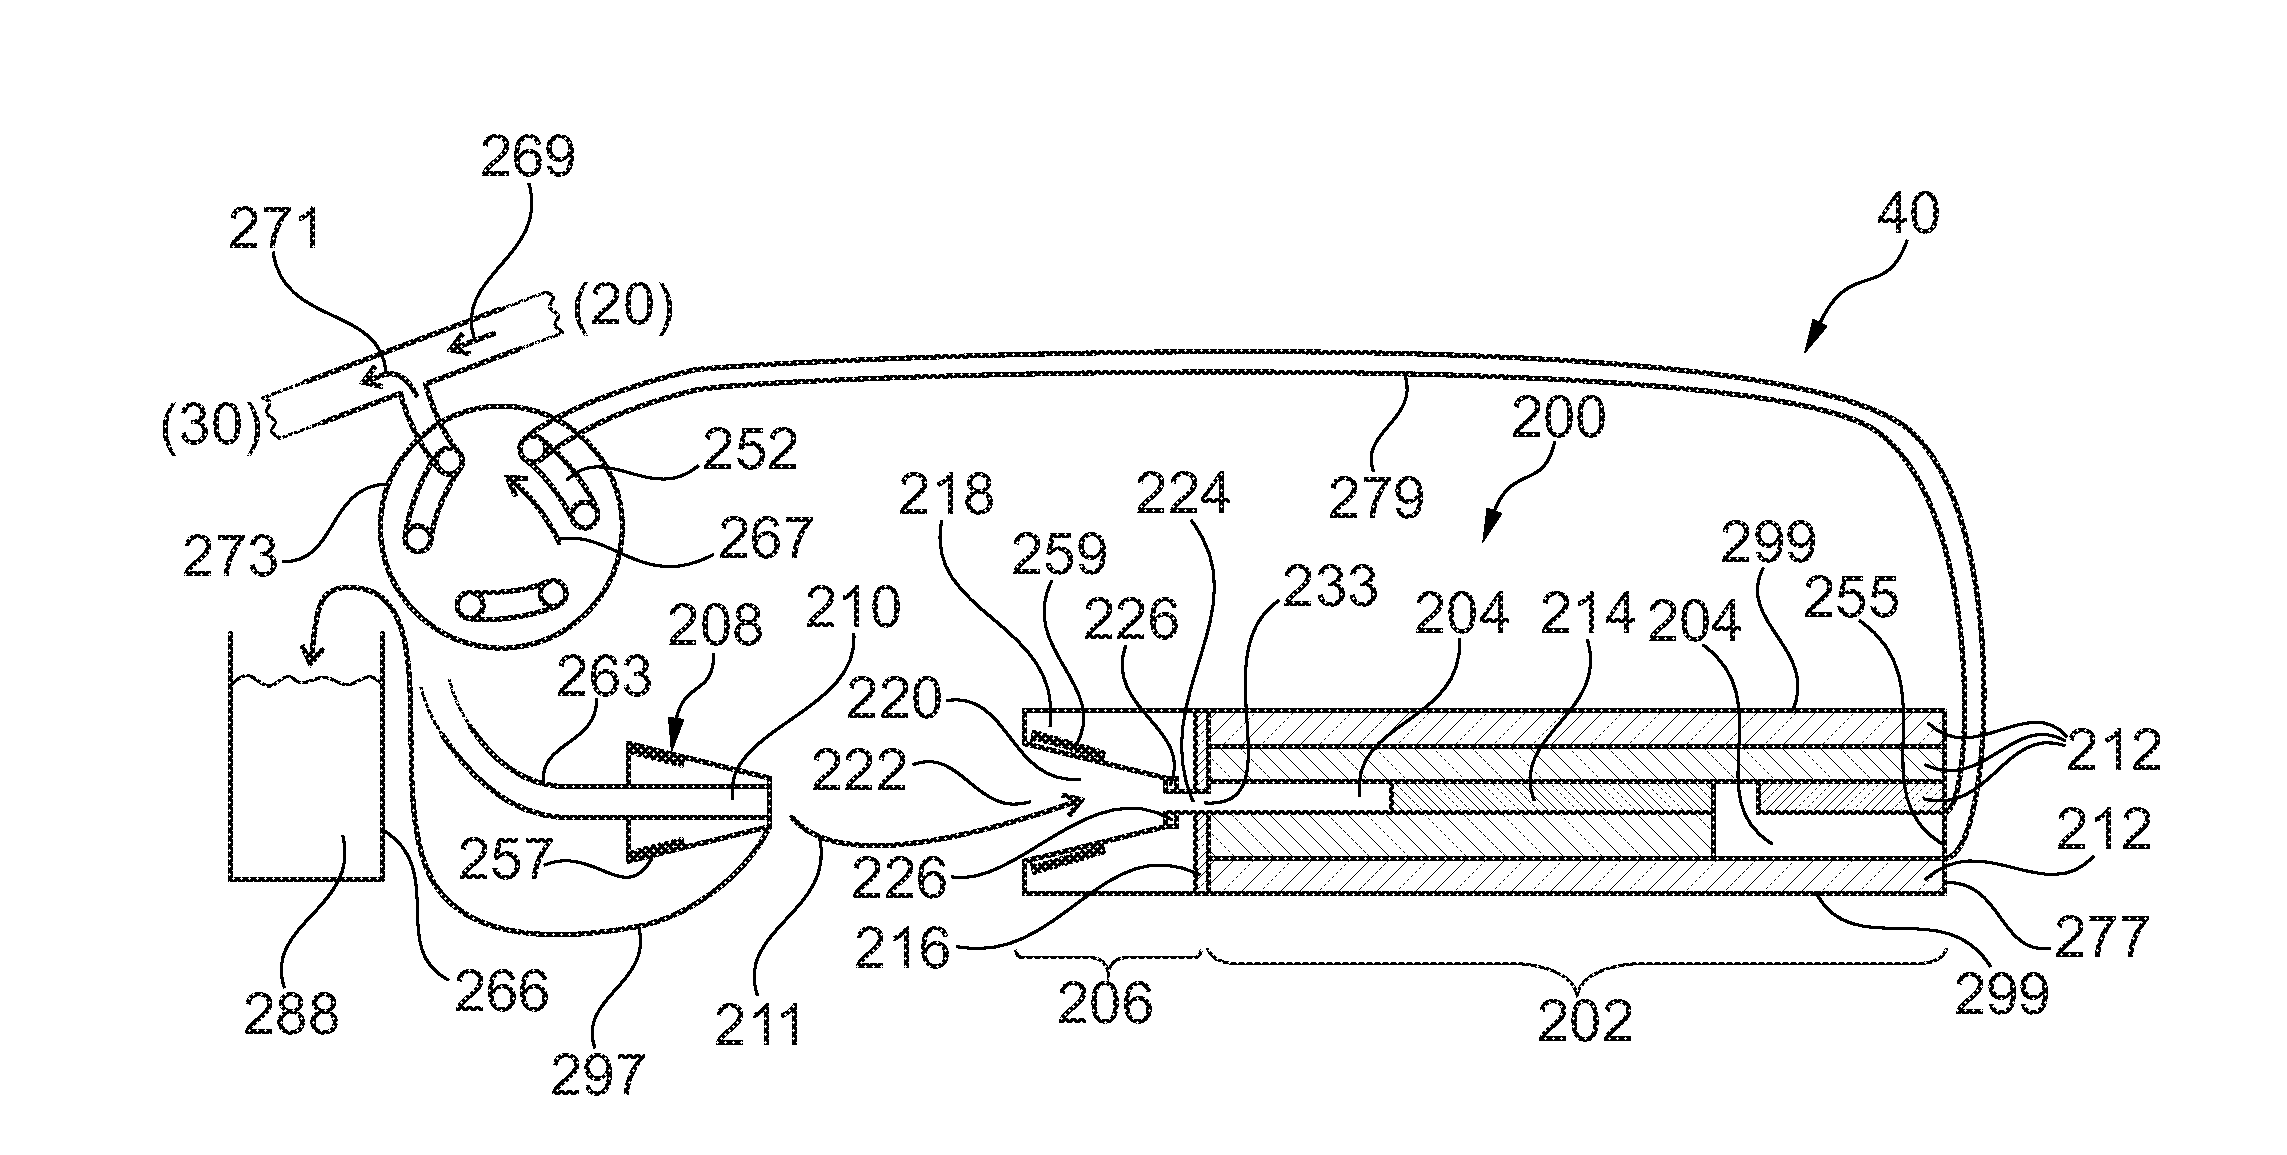 Integrated fluidic connection of planar structures for sample separation devices